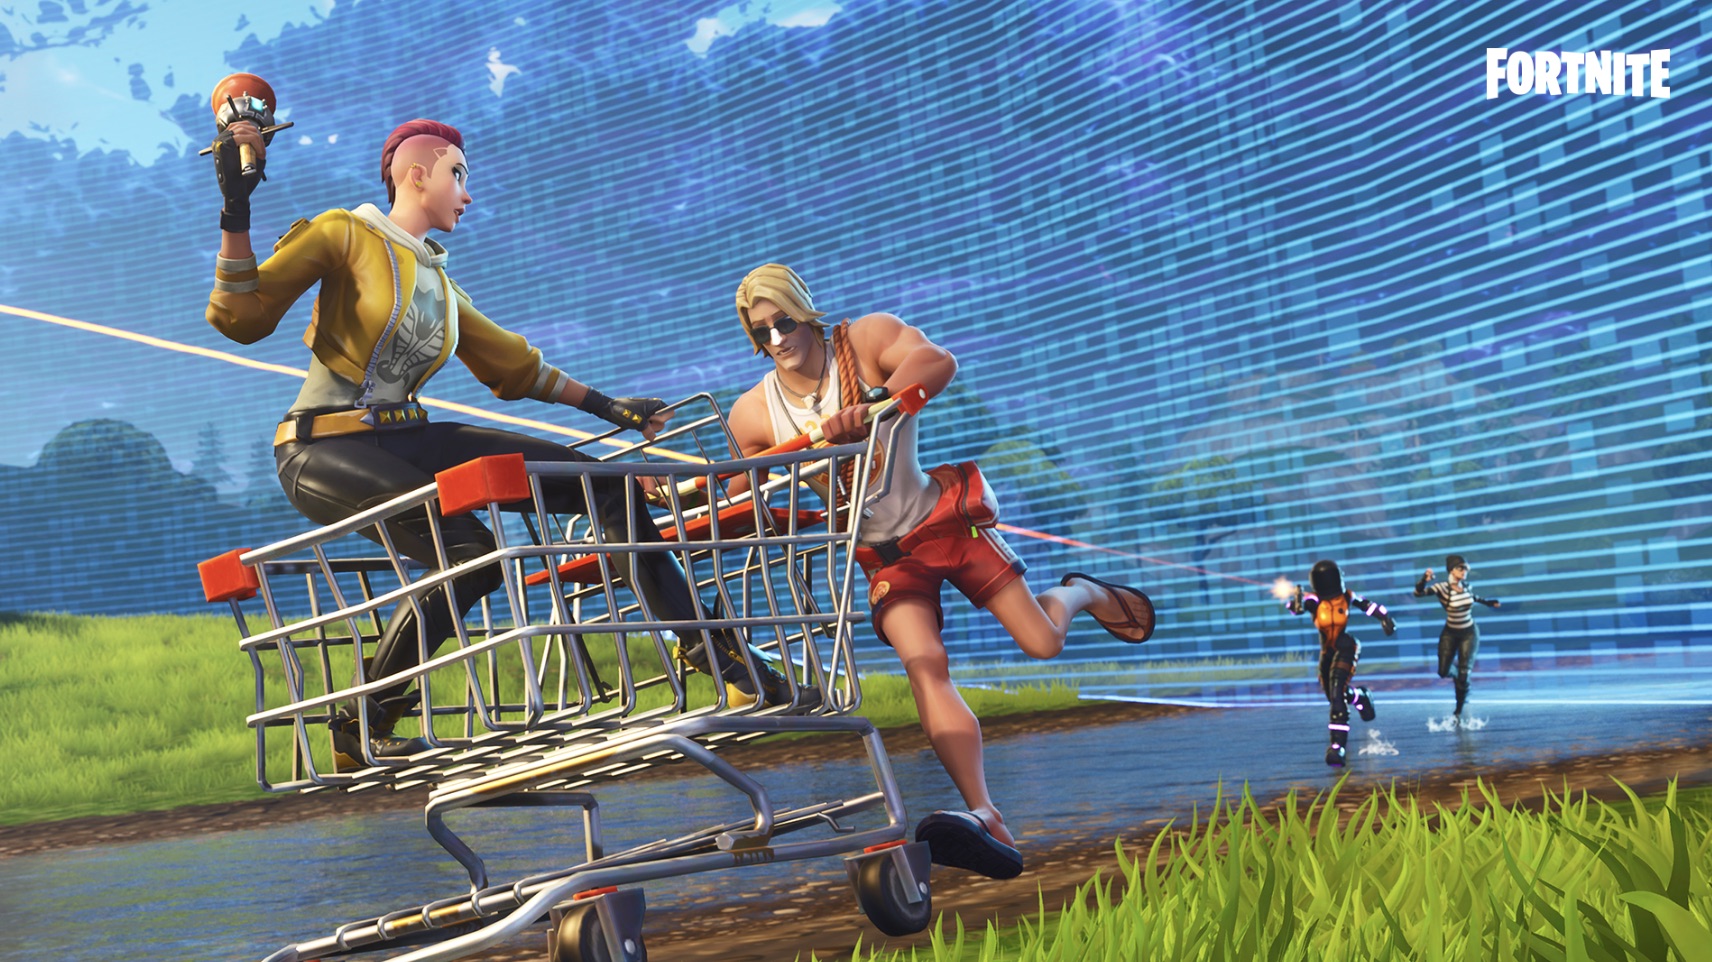 Latest Fortnite update makes it possible to change the framerate – and adds a shotgun